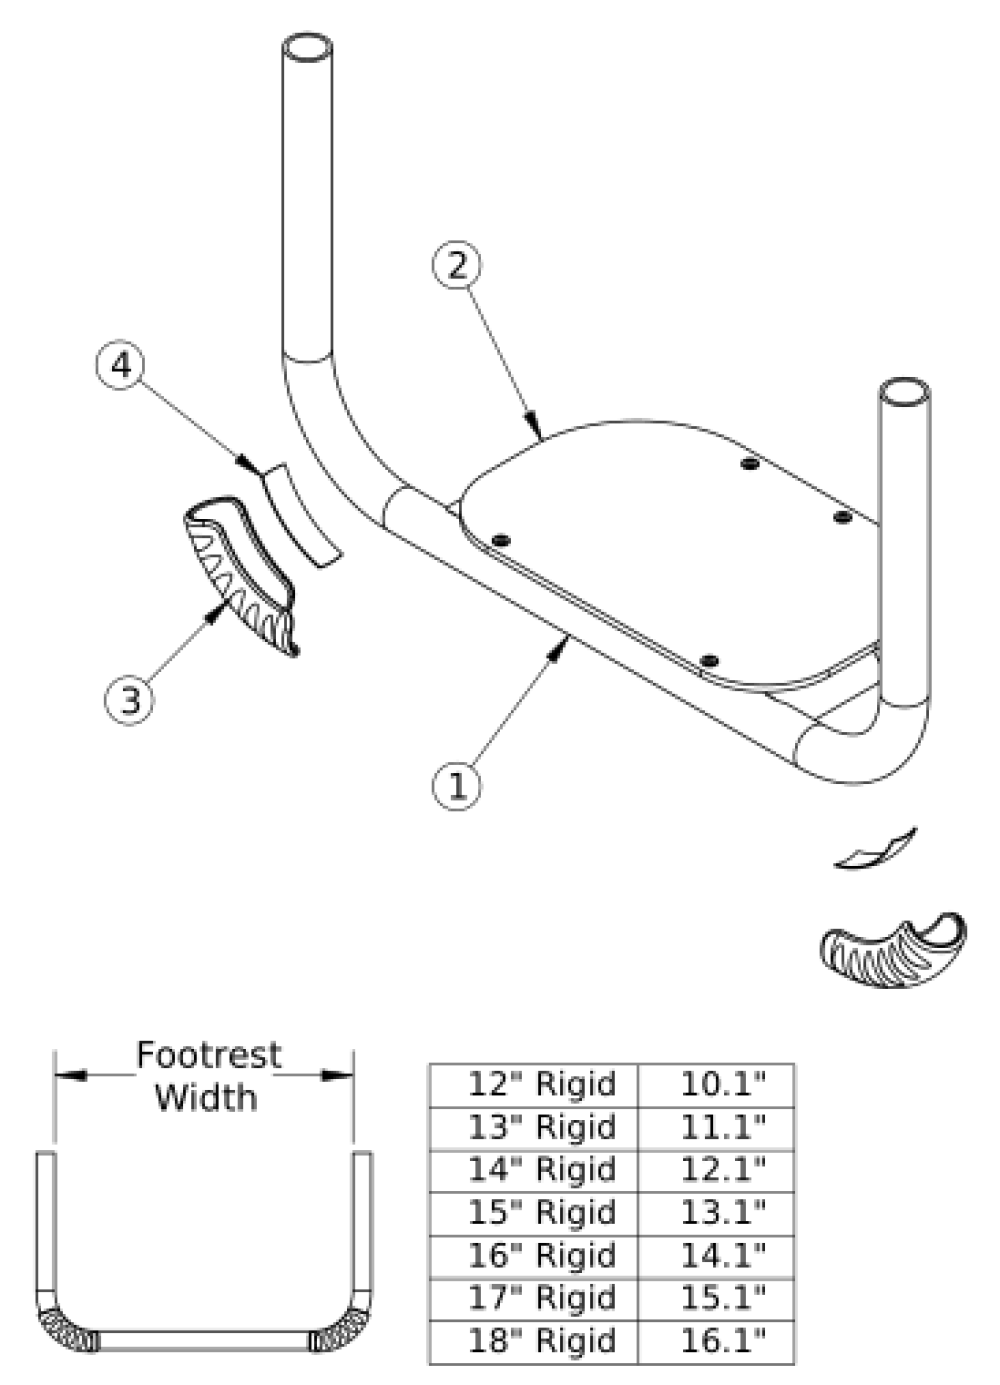 Ethos Tubular Footrest With Abs Cover parts diagram